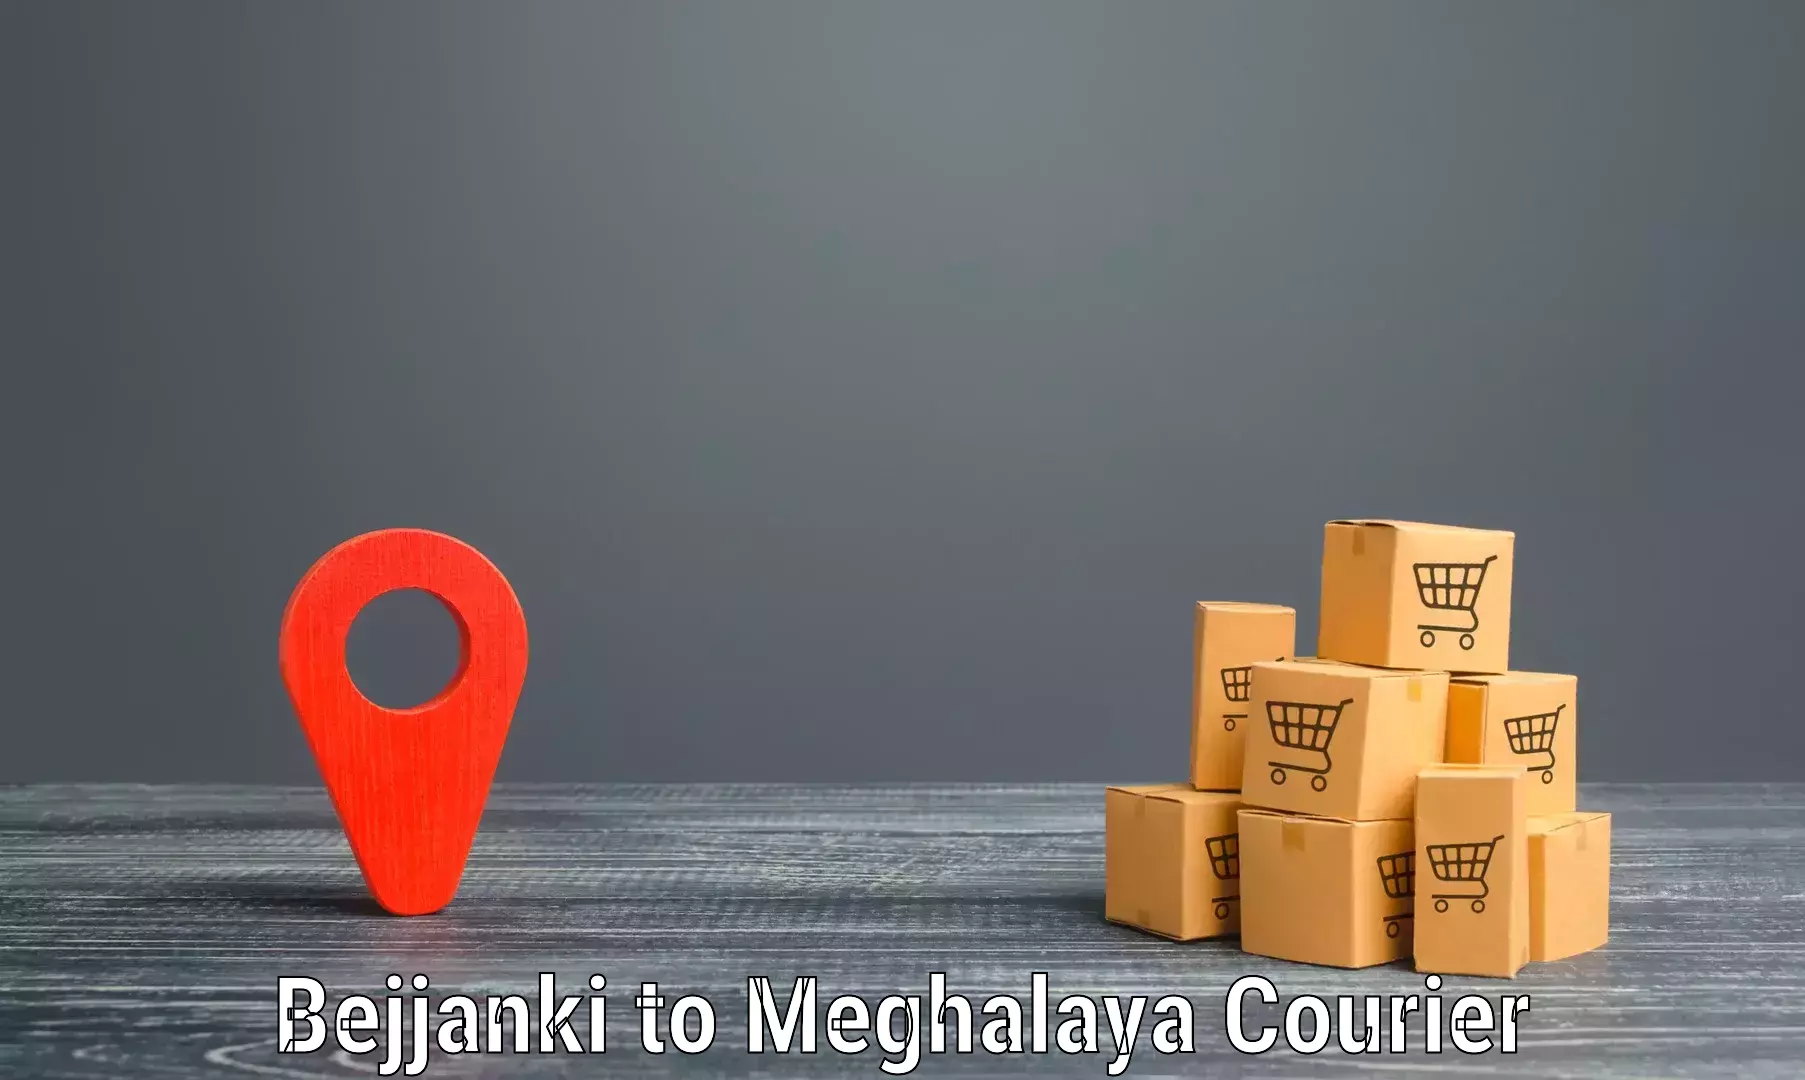 Customized shipping options in Bejjanki to Shillong